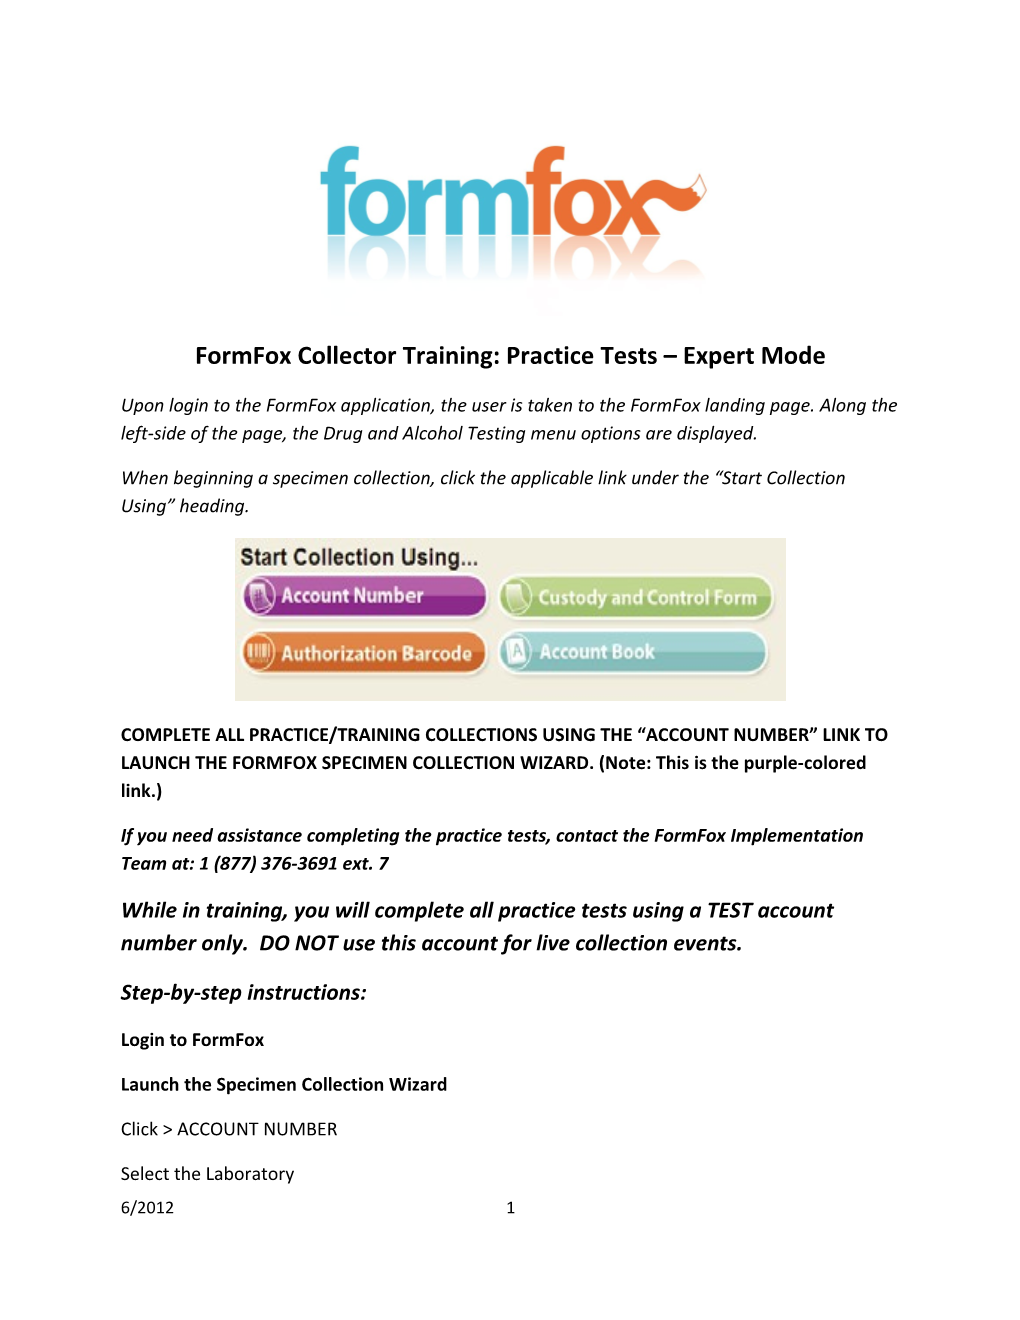 Formfox Collector Training: Practice Tests Expert Mode